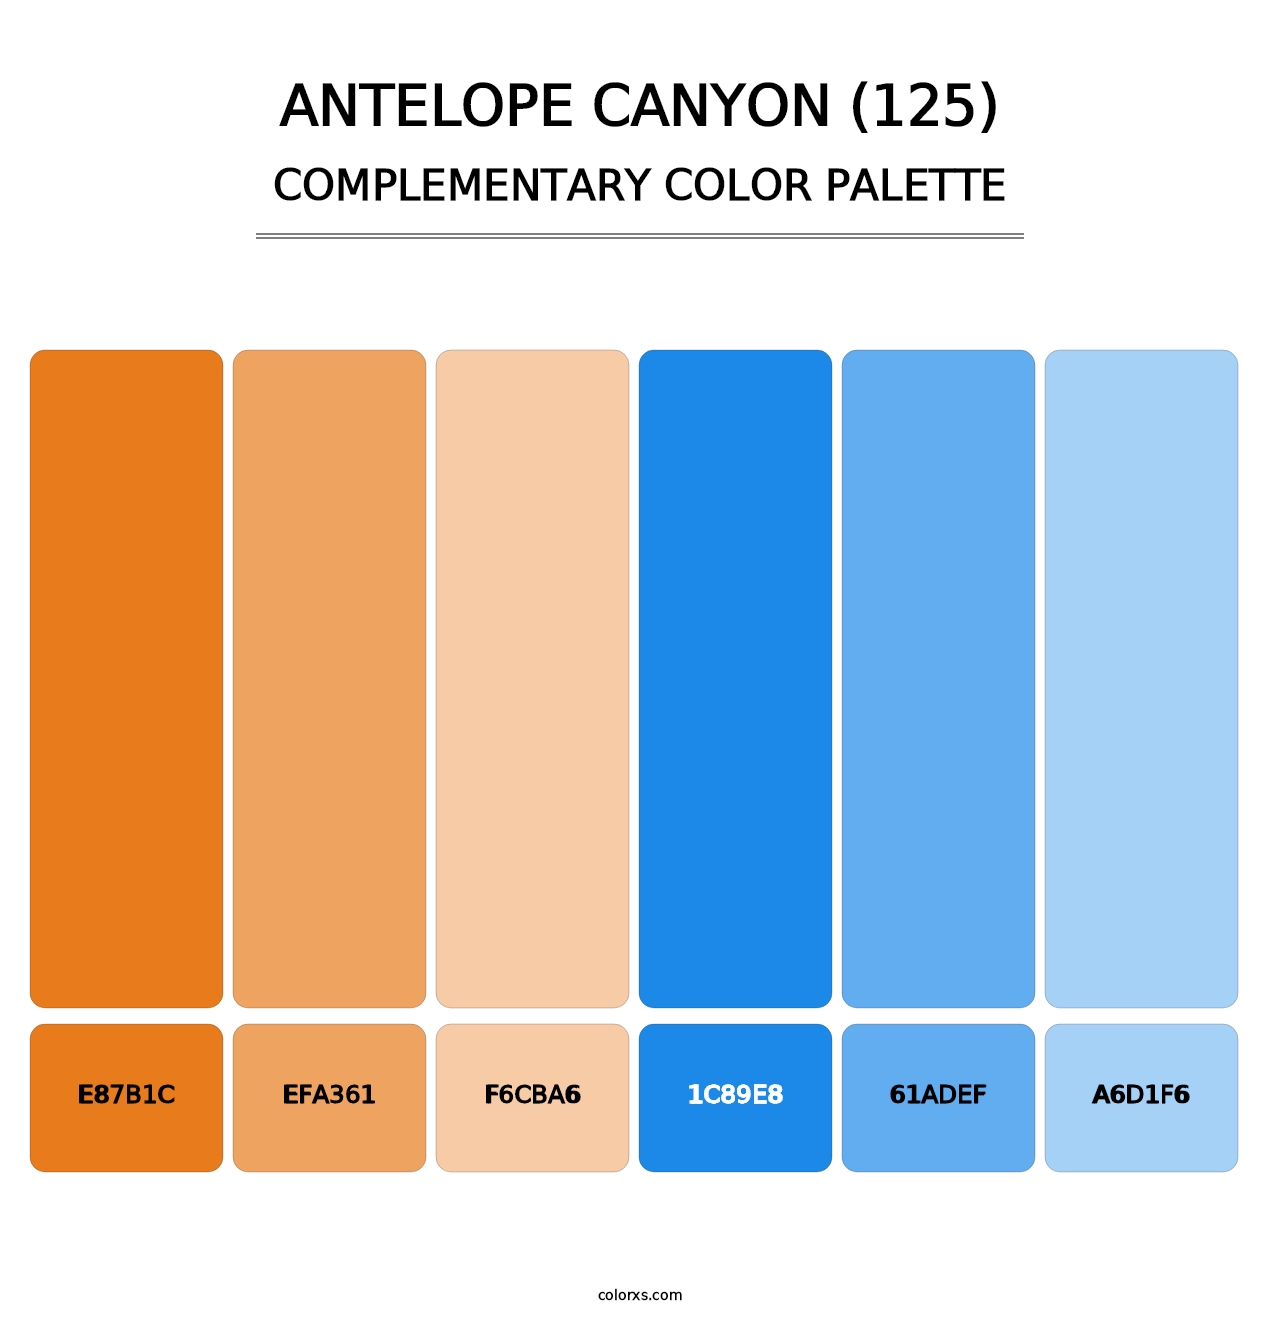 Antelope Canyon (125) - Complementary Color Palette